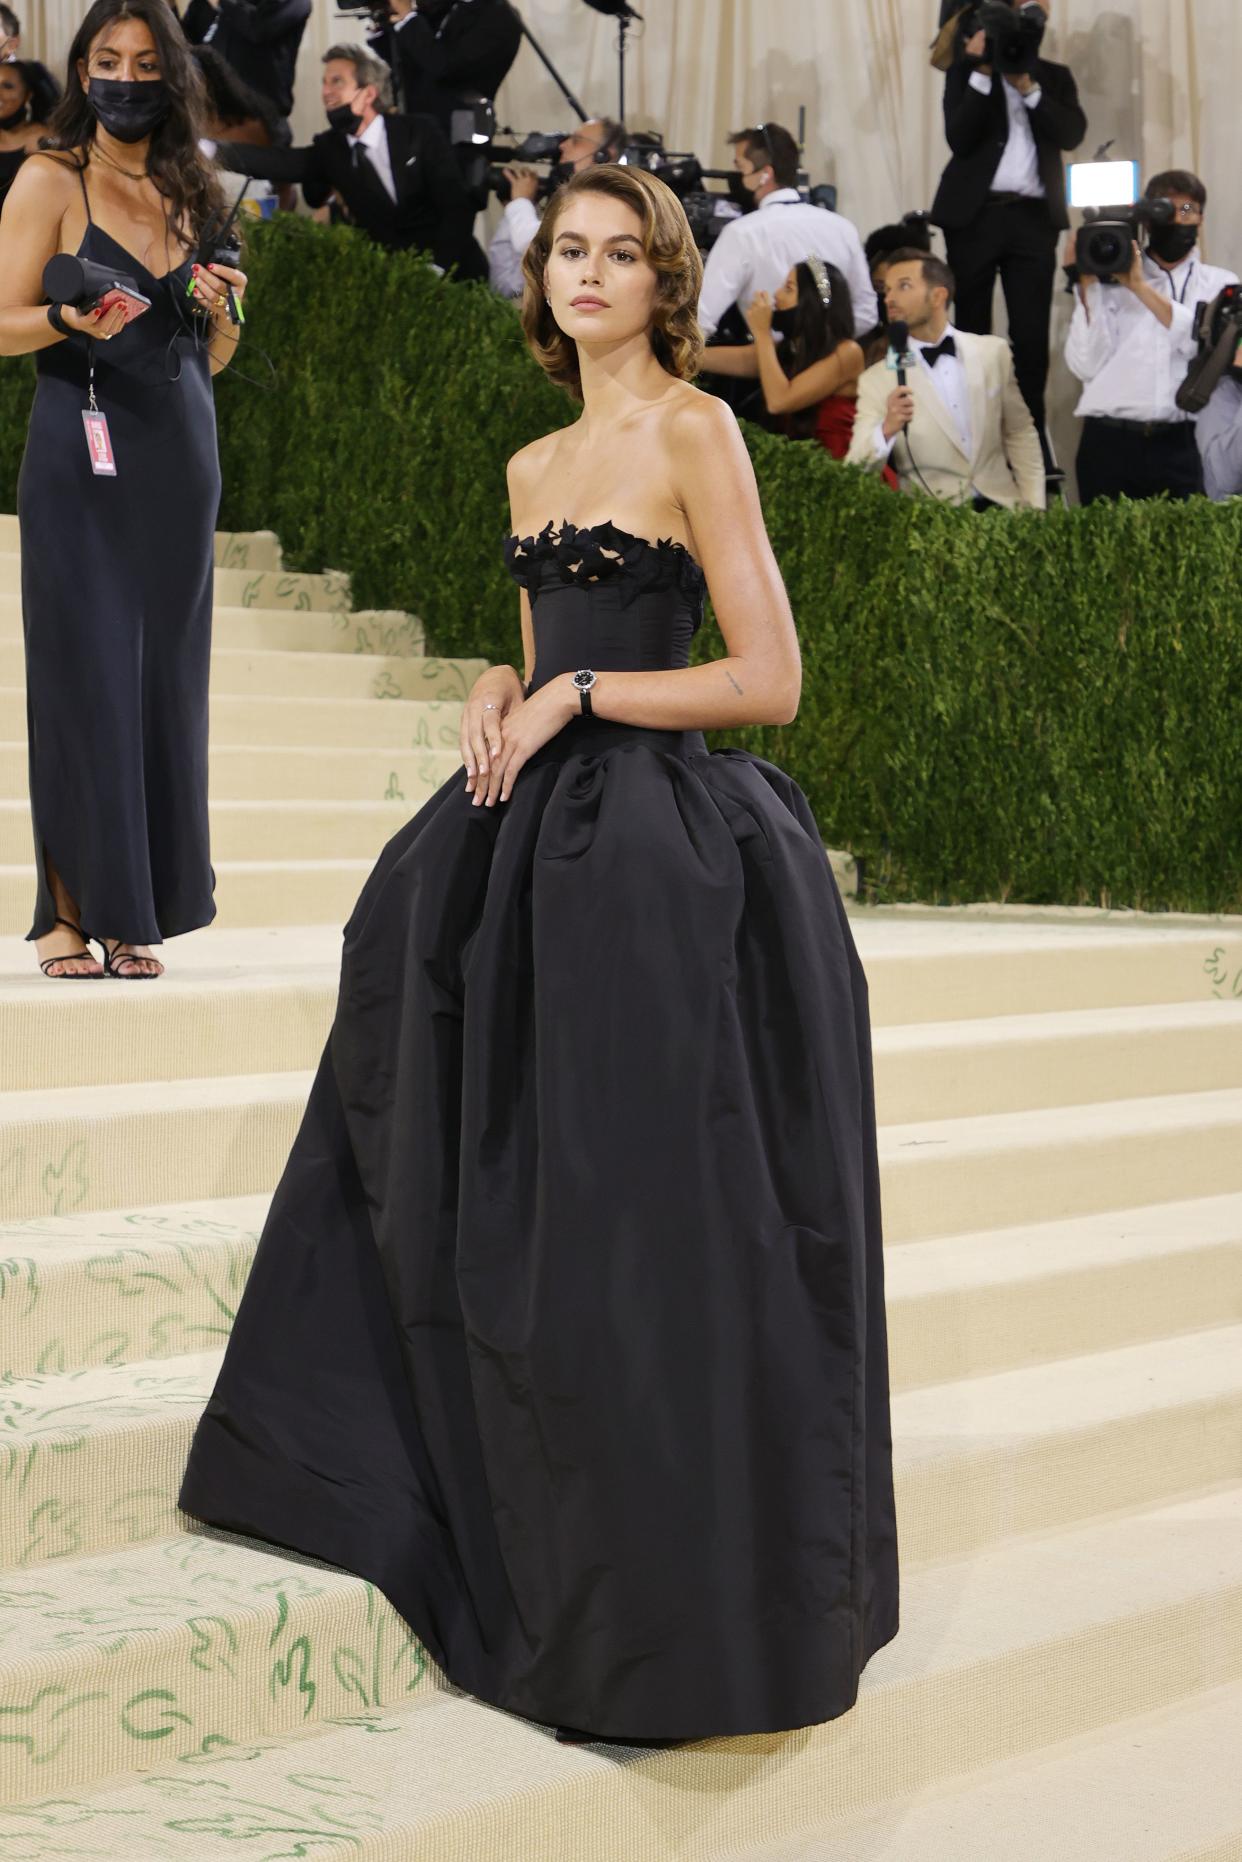 Kaia Gerber attends The 2021 Met Gala Celebrating In America: A Lexicon Of Fashion at Metropolitan Museum of Art on Sept. 13, 2021 in New York.